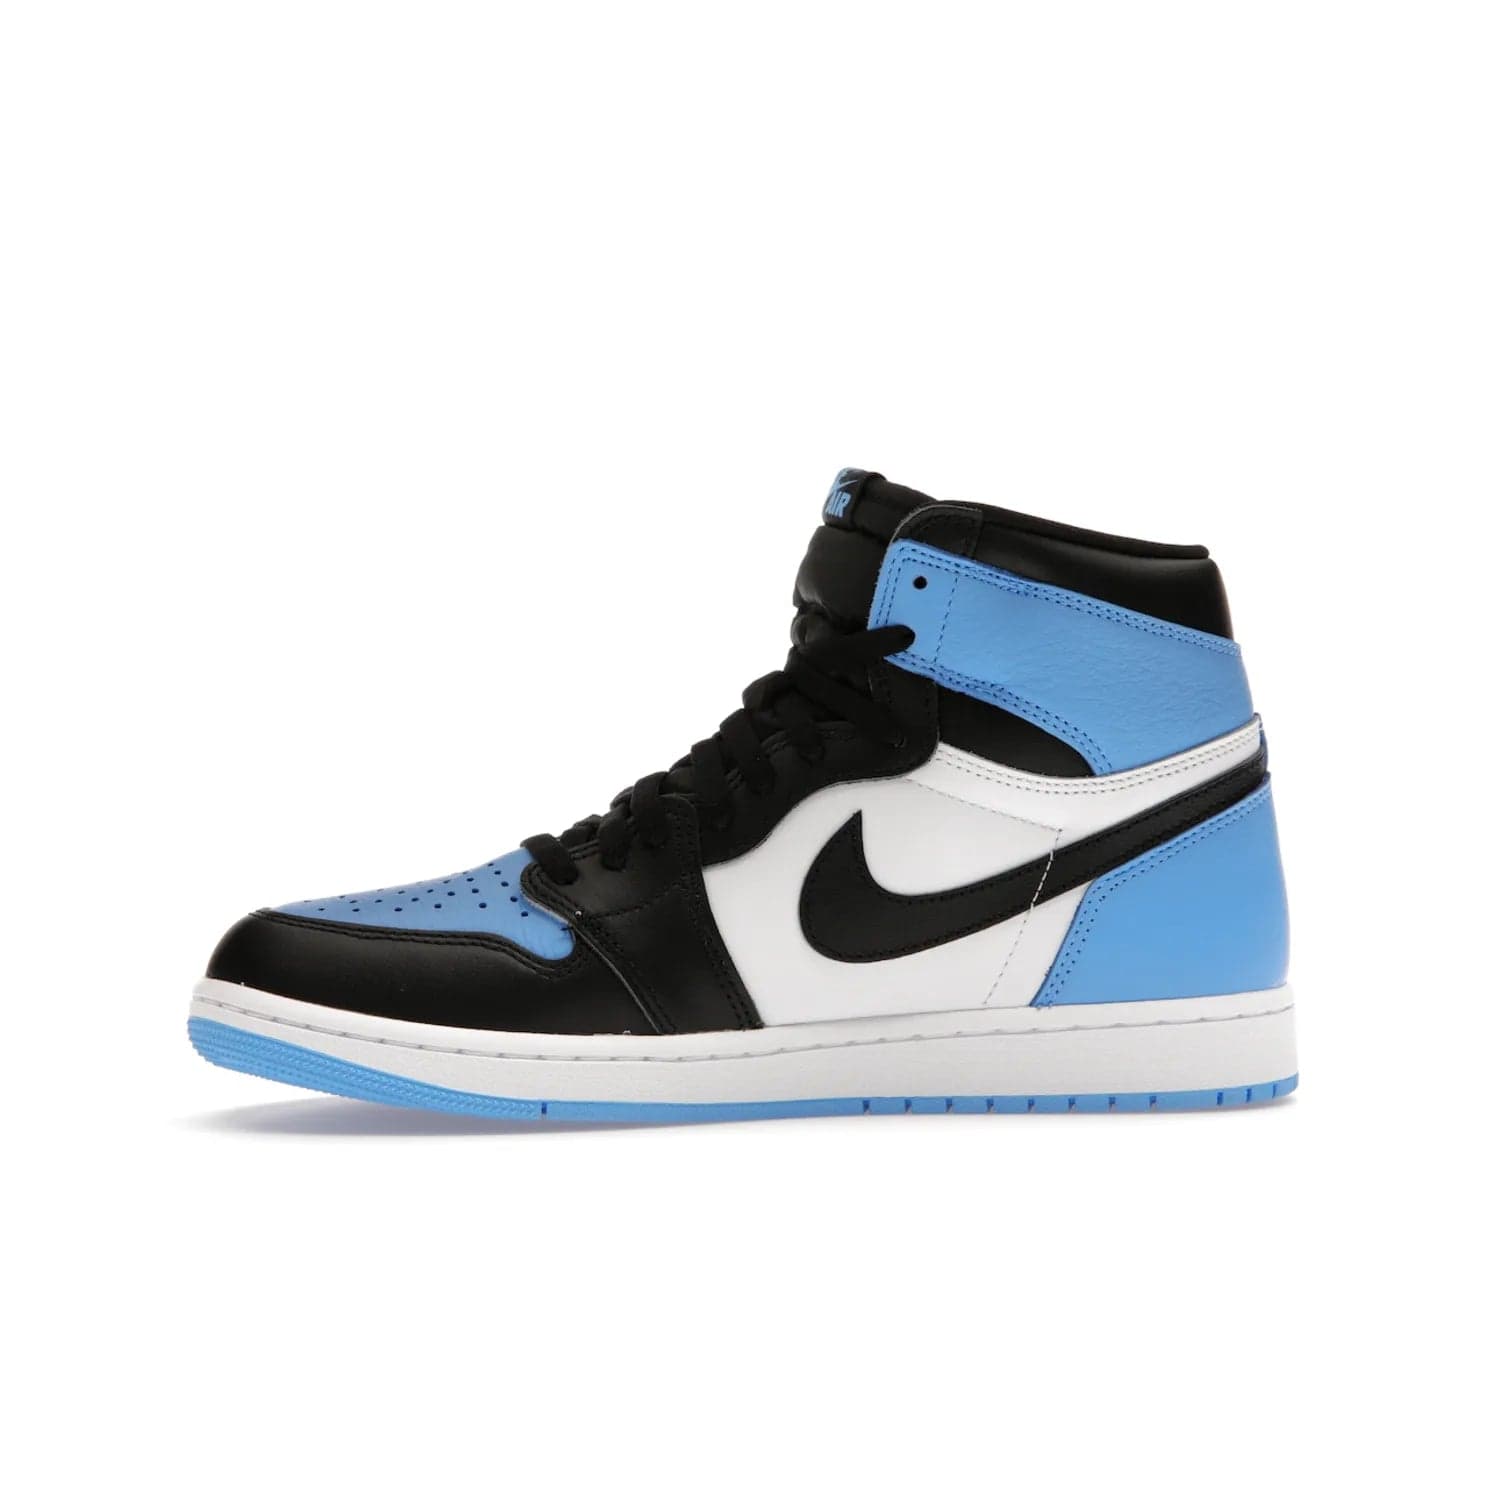 Jordan 1 Retro High OG UNC Toe - Image 18 - Only at www.BallersClubKickz.com - Jordan 1 High OG UNC Toe is a fashionable, high-quality sneaker featuring University Blue, Black White and White. Releasing July 22, 2023, it's the perfect pick up for sneakerheads.